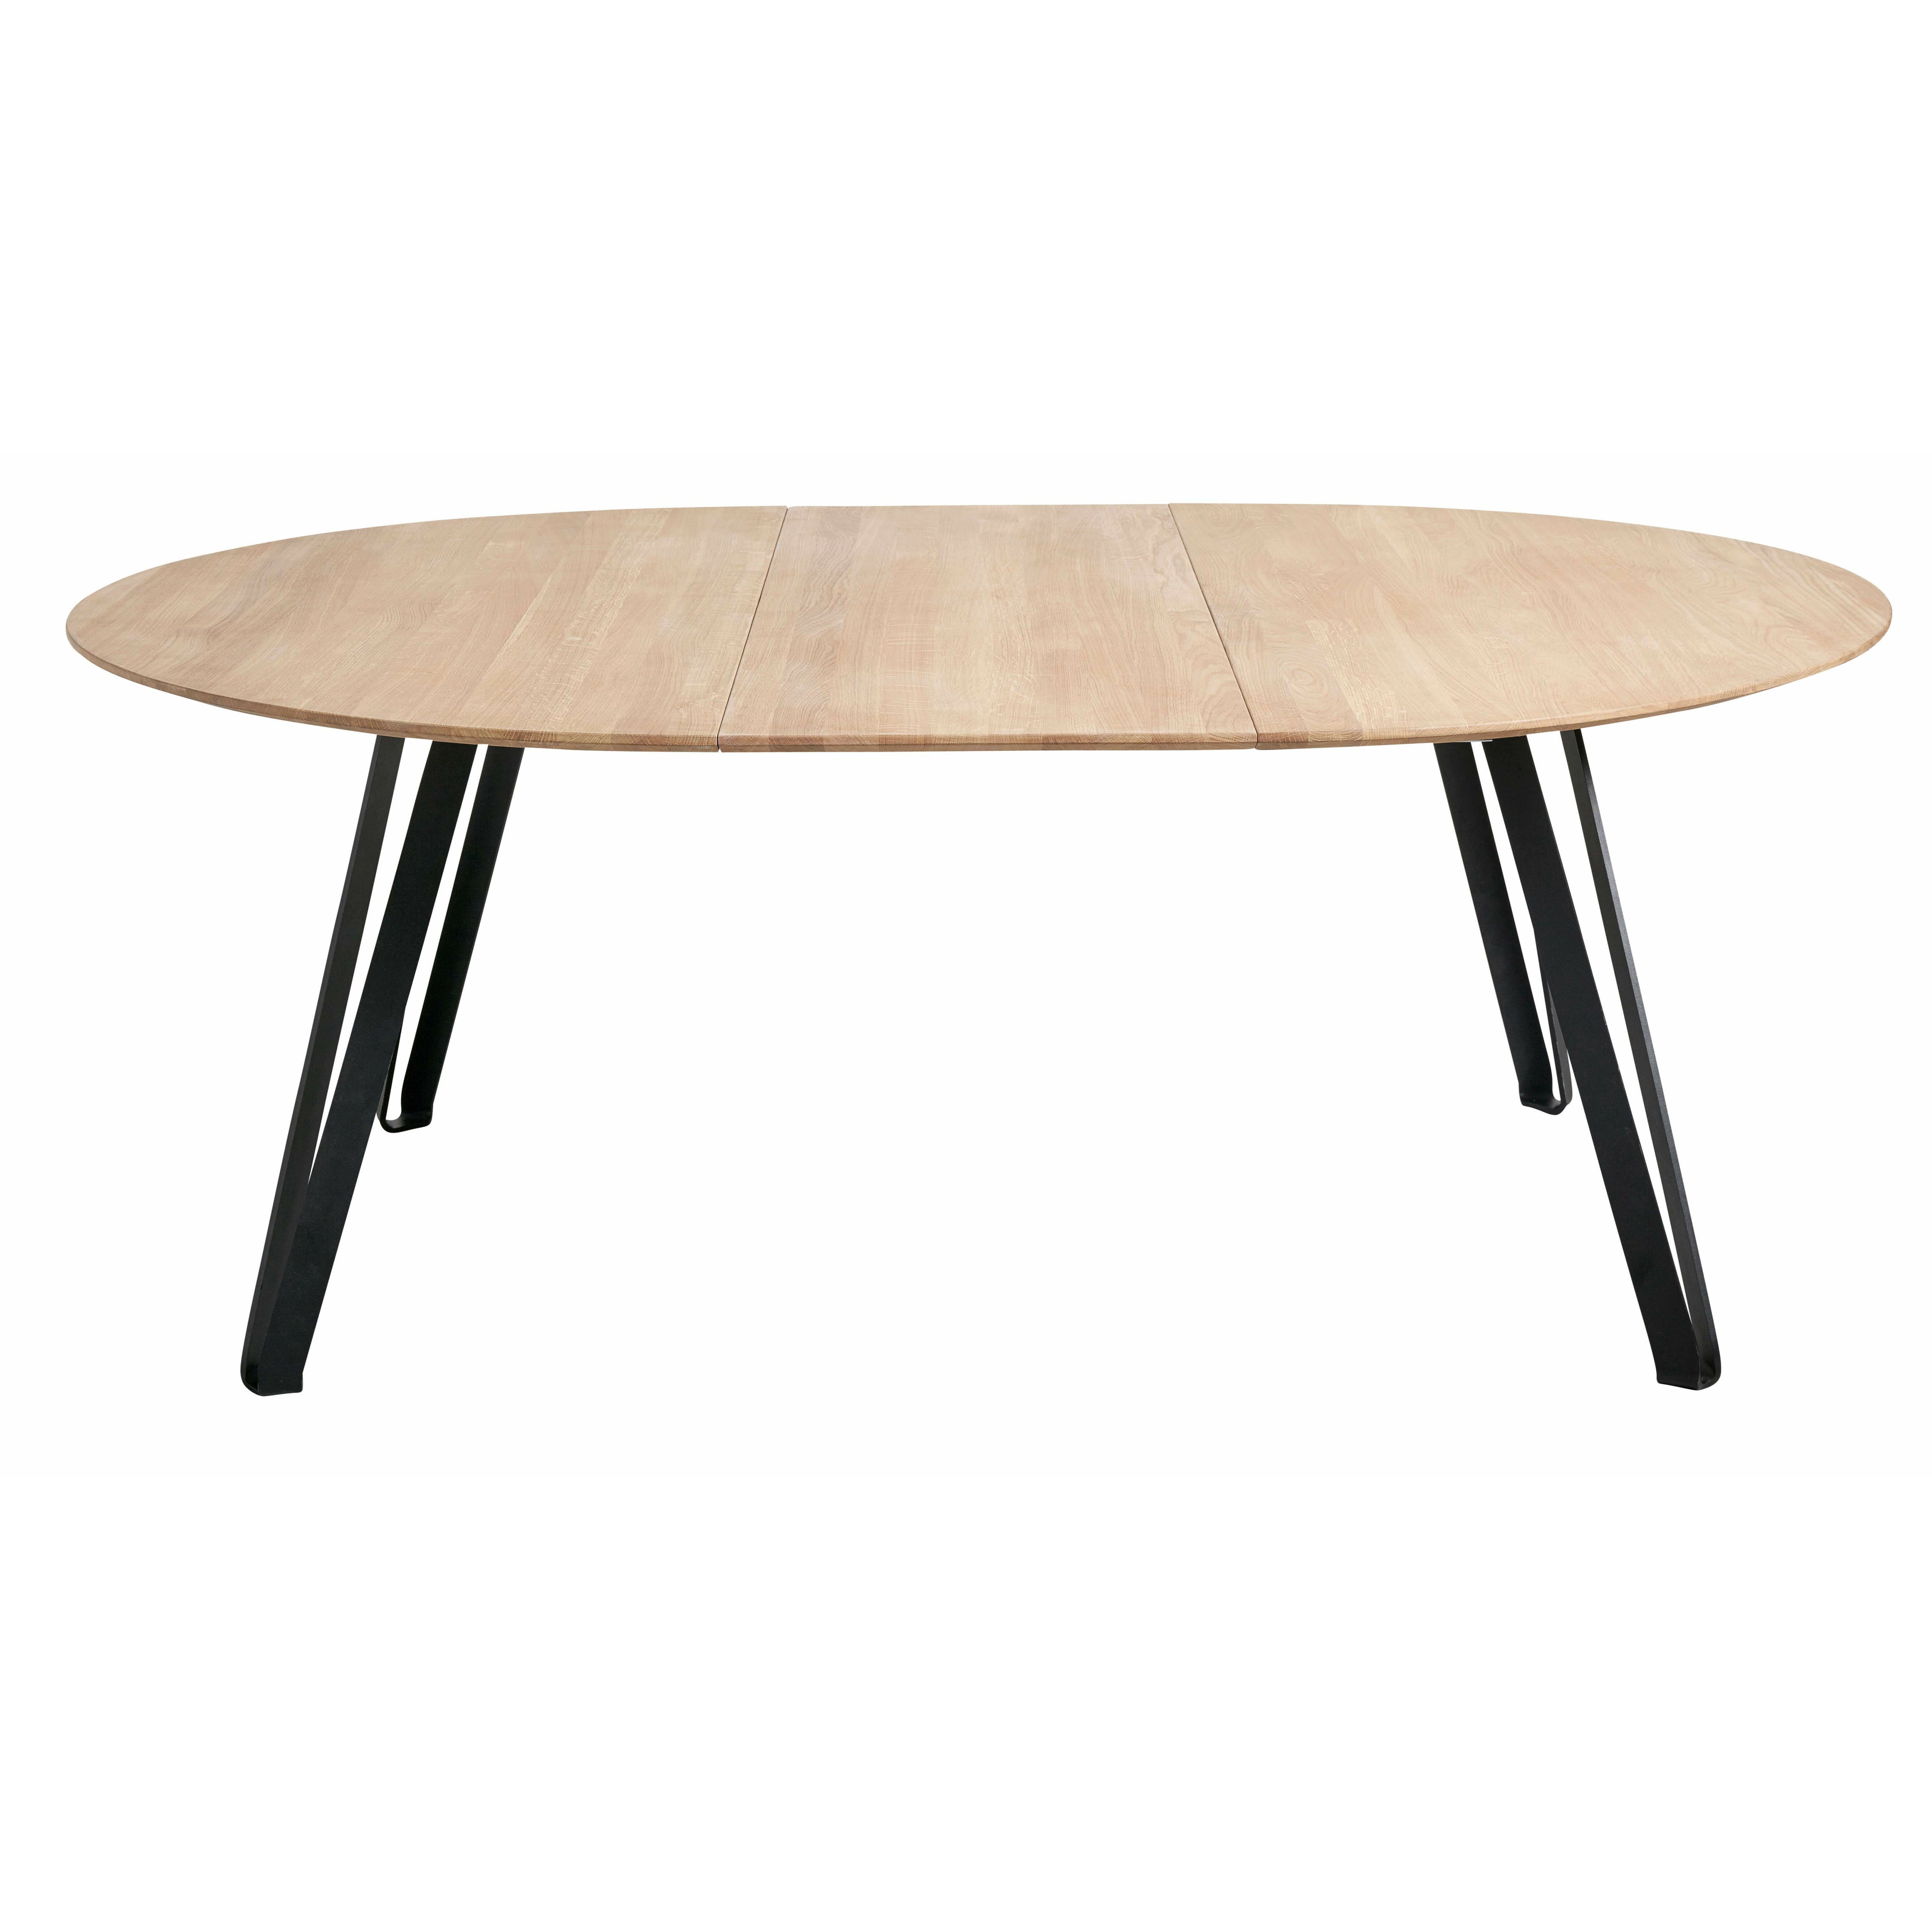 Muubs Space Dining Table Round Oak, 150cm